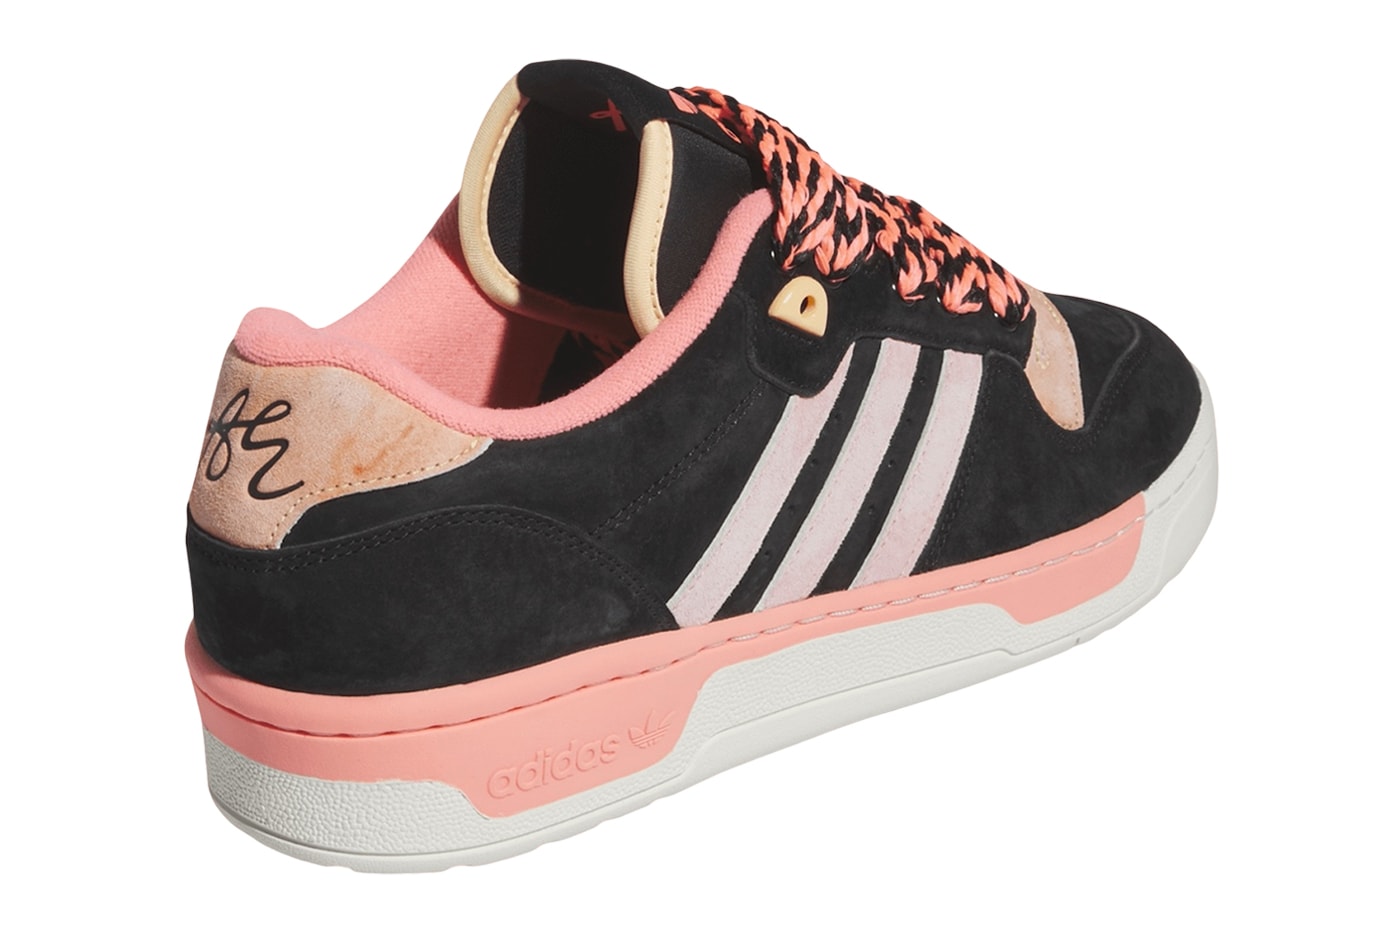 Anthony Edwards Latest adidas Rivalry Low Shoe Has Surfaced IH7729 now available released skate shoe pink black three stripes